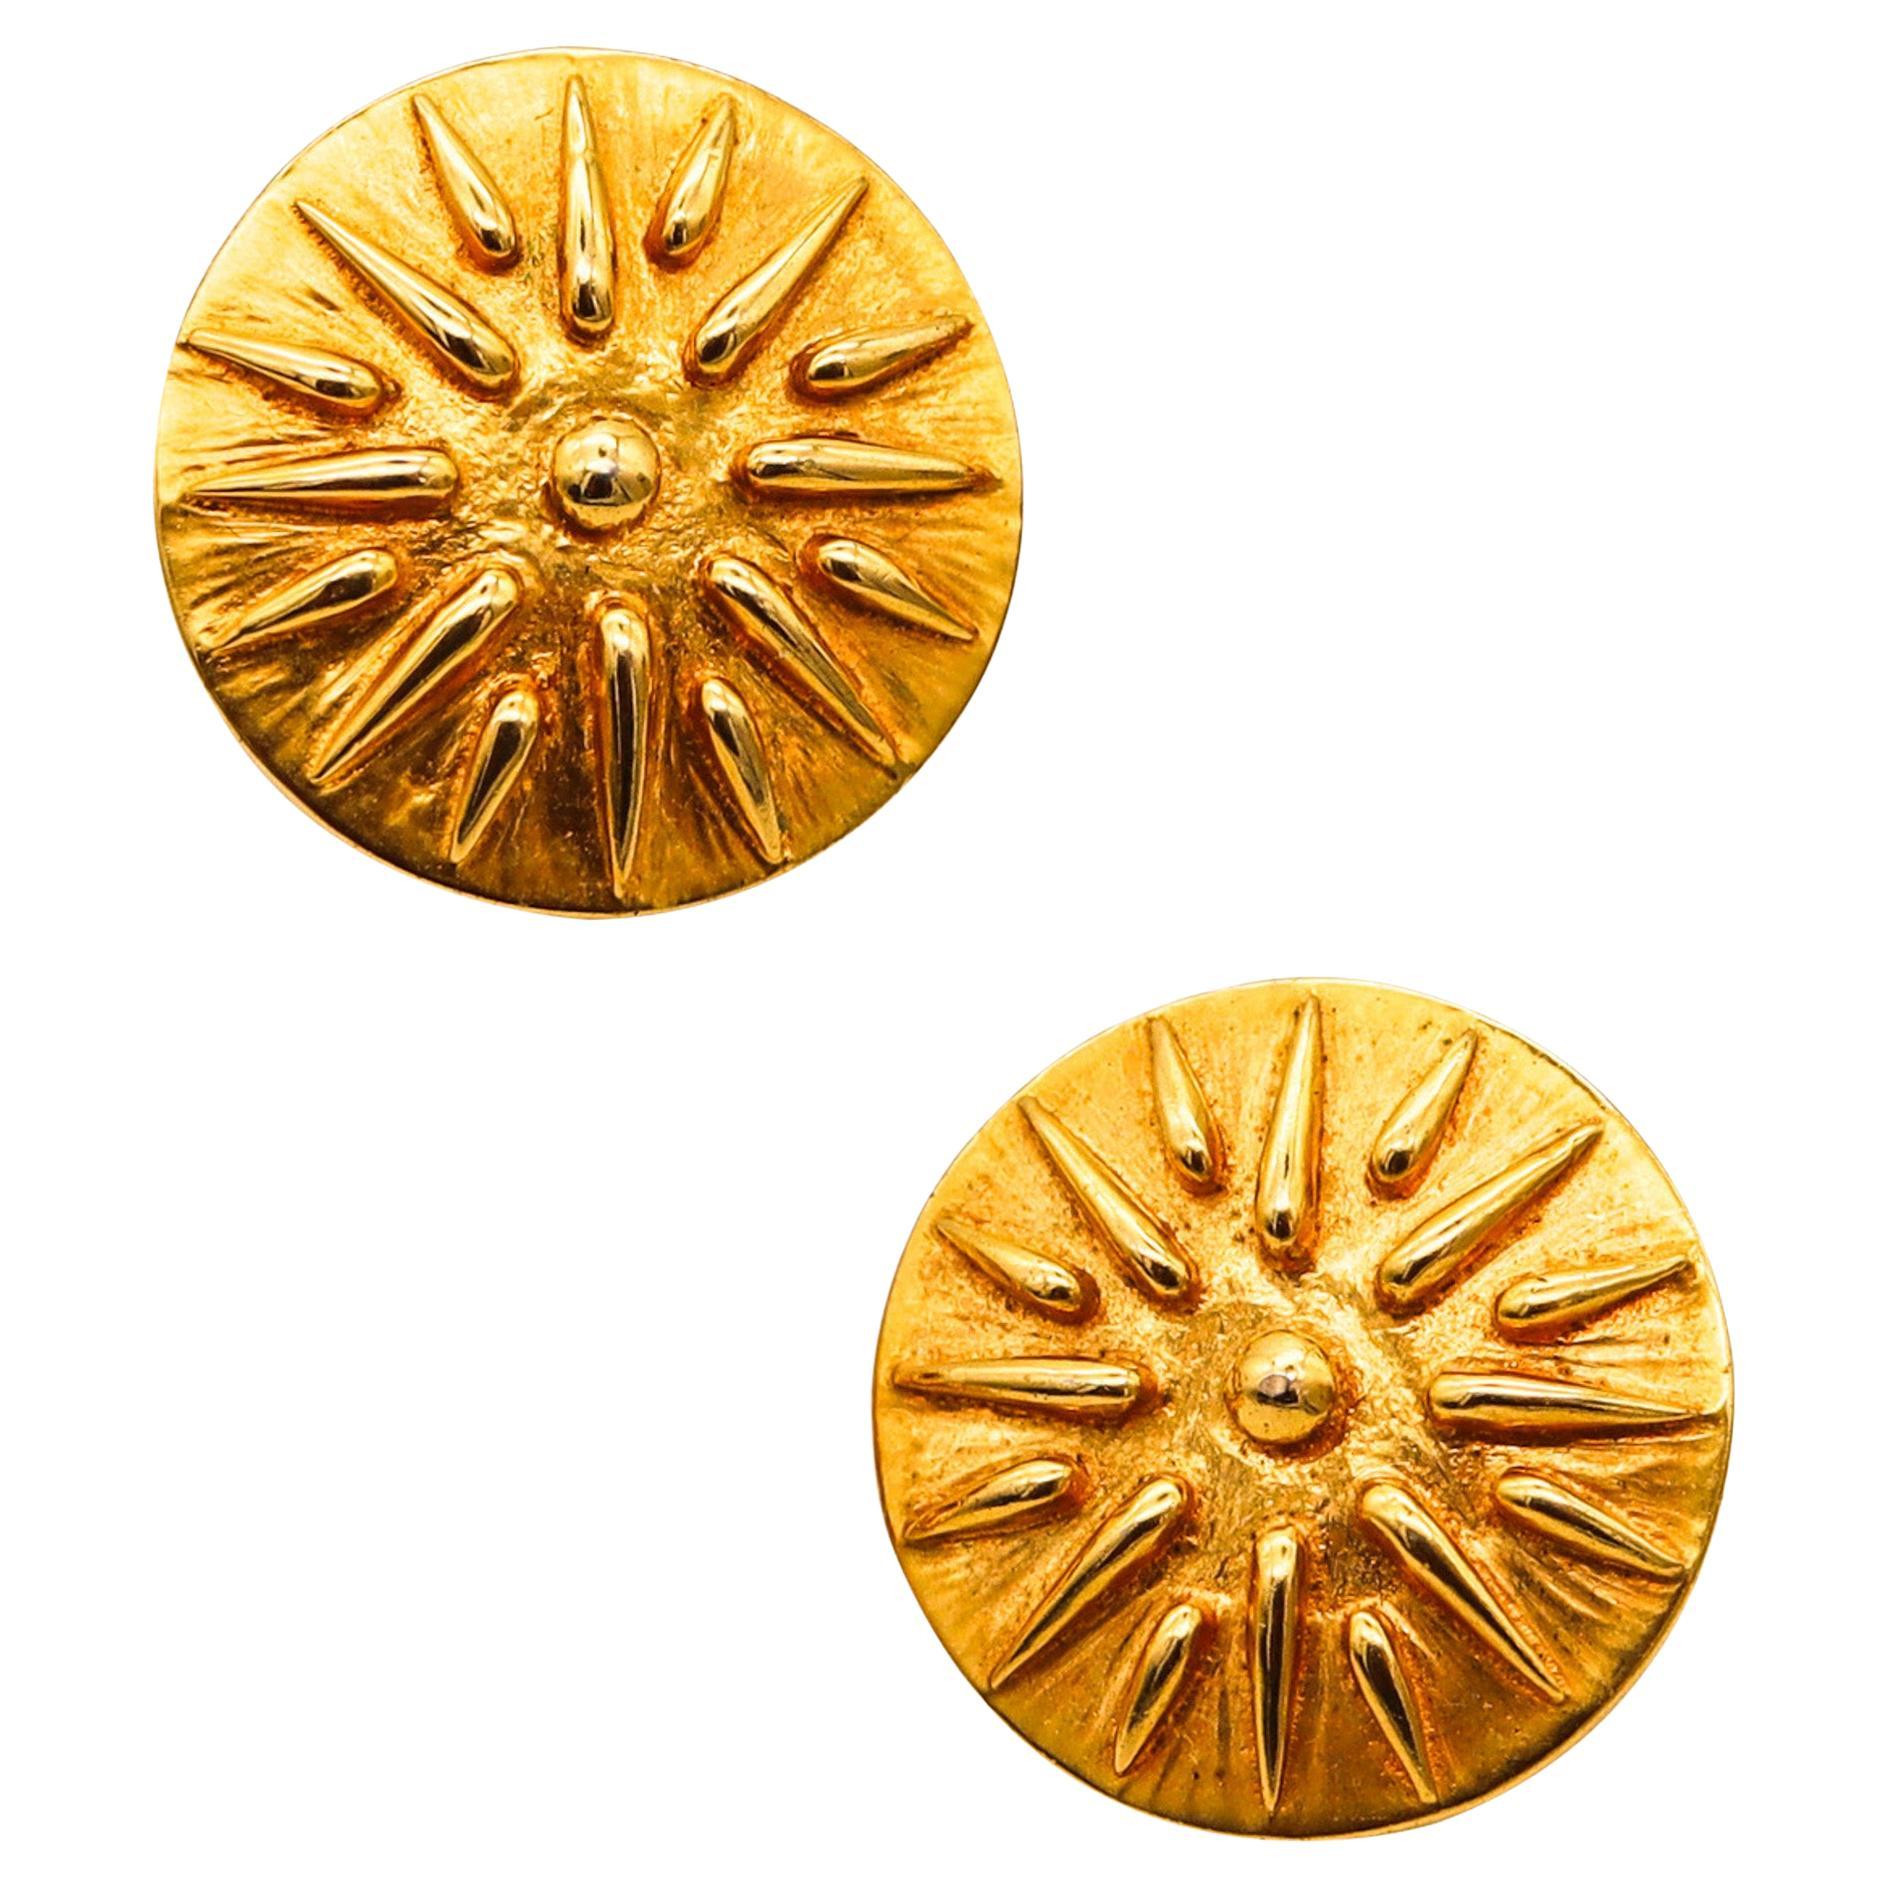 Zolotas Greece Round Sunburst Studs Earrings in Solid 18Kt Yellow Gold For Sale